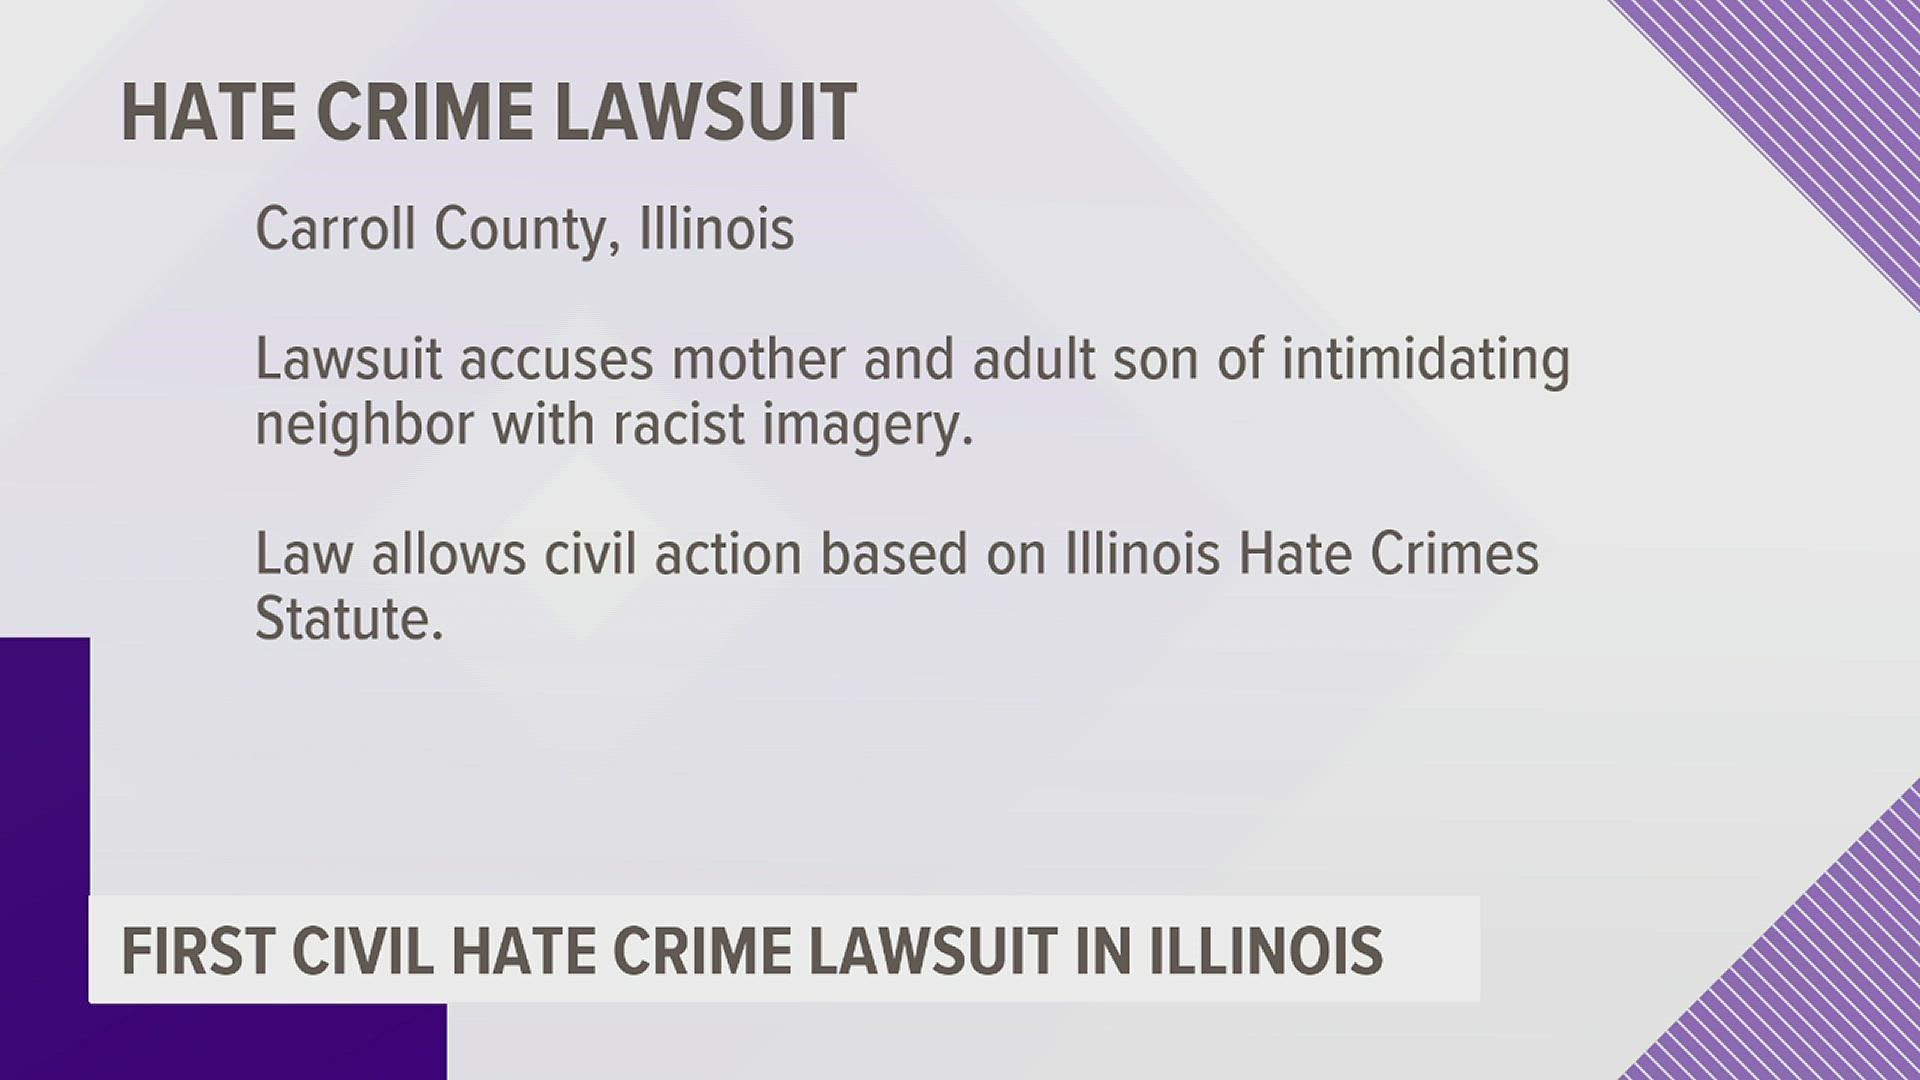 The lawsuit was filed May 31 by Illinois Attorney General Kwame Raoul against two Carroll County residents.